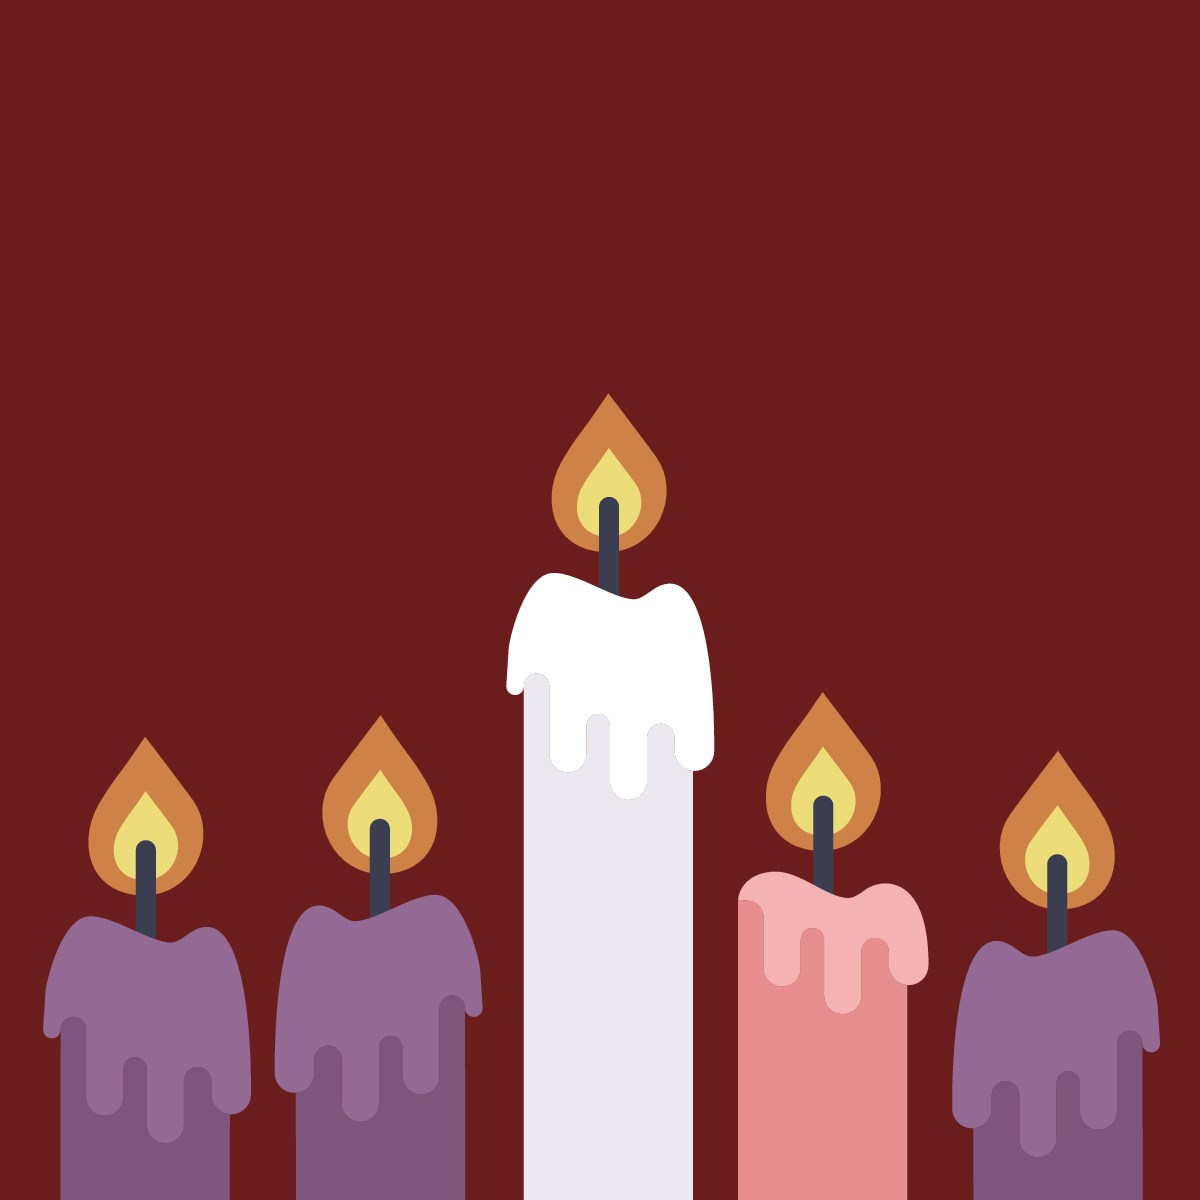 a sketch of 5 lit candles in a row